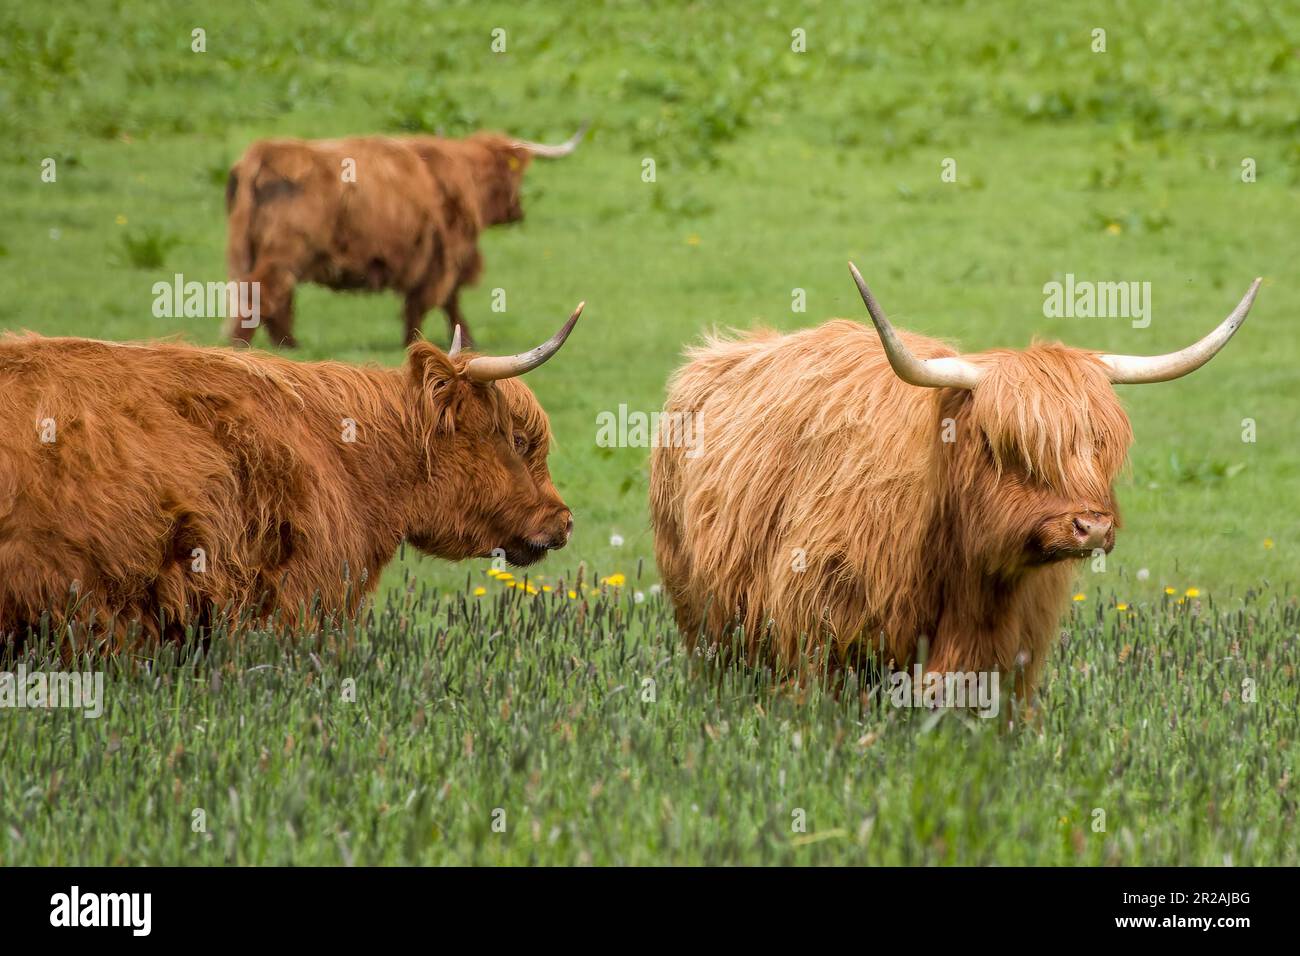 highland cows a Scottish rustic breed of cattle Stock Photo